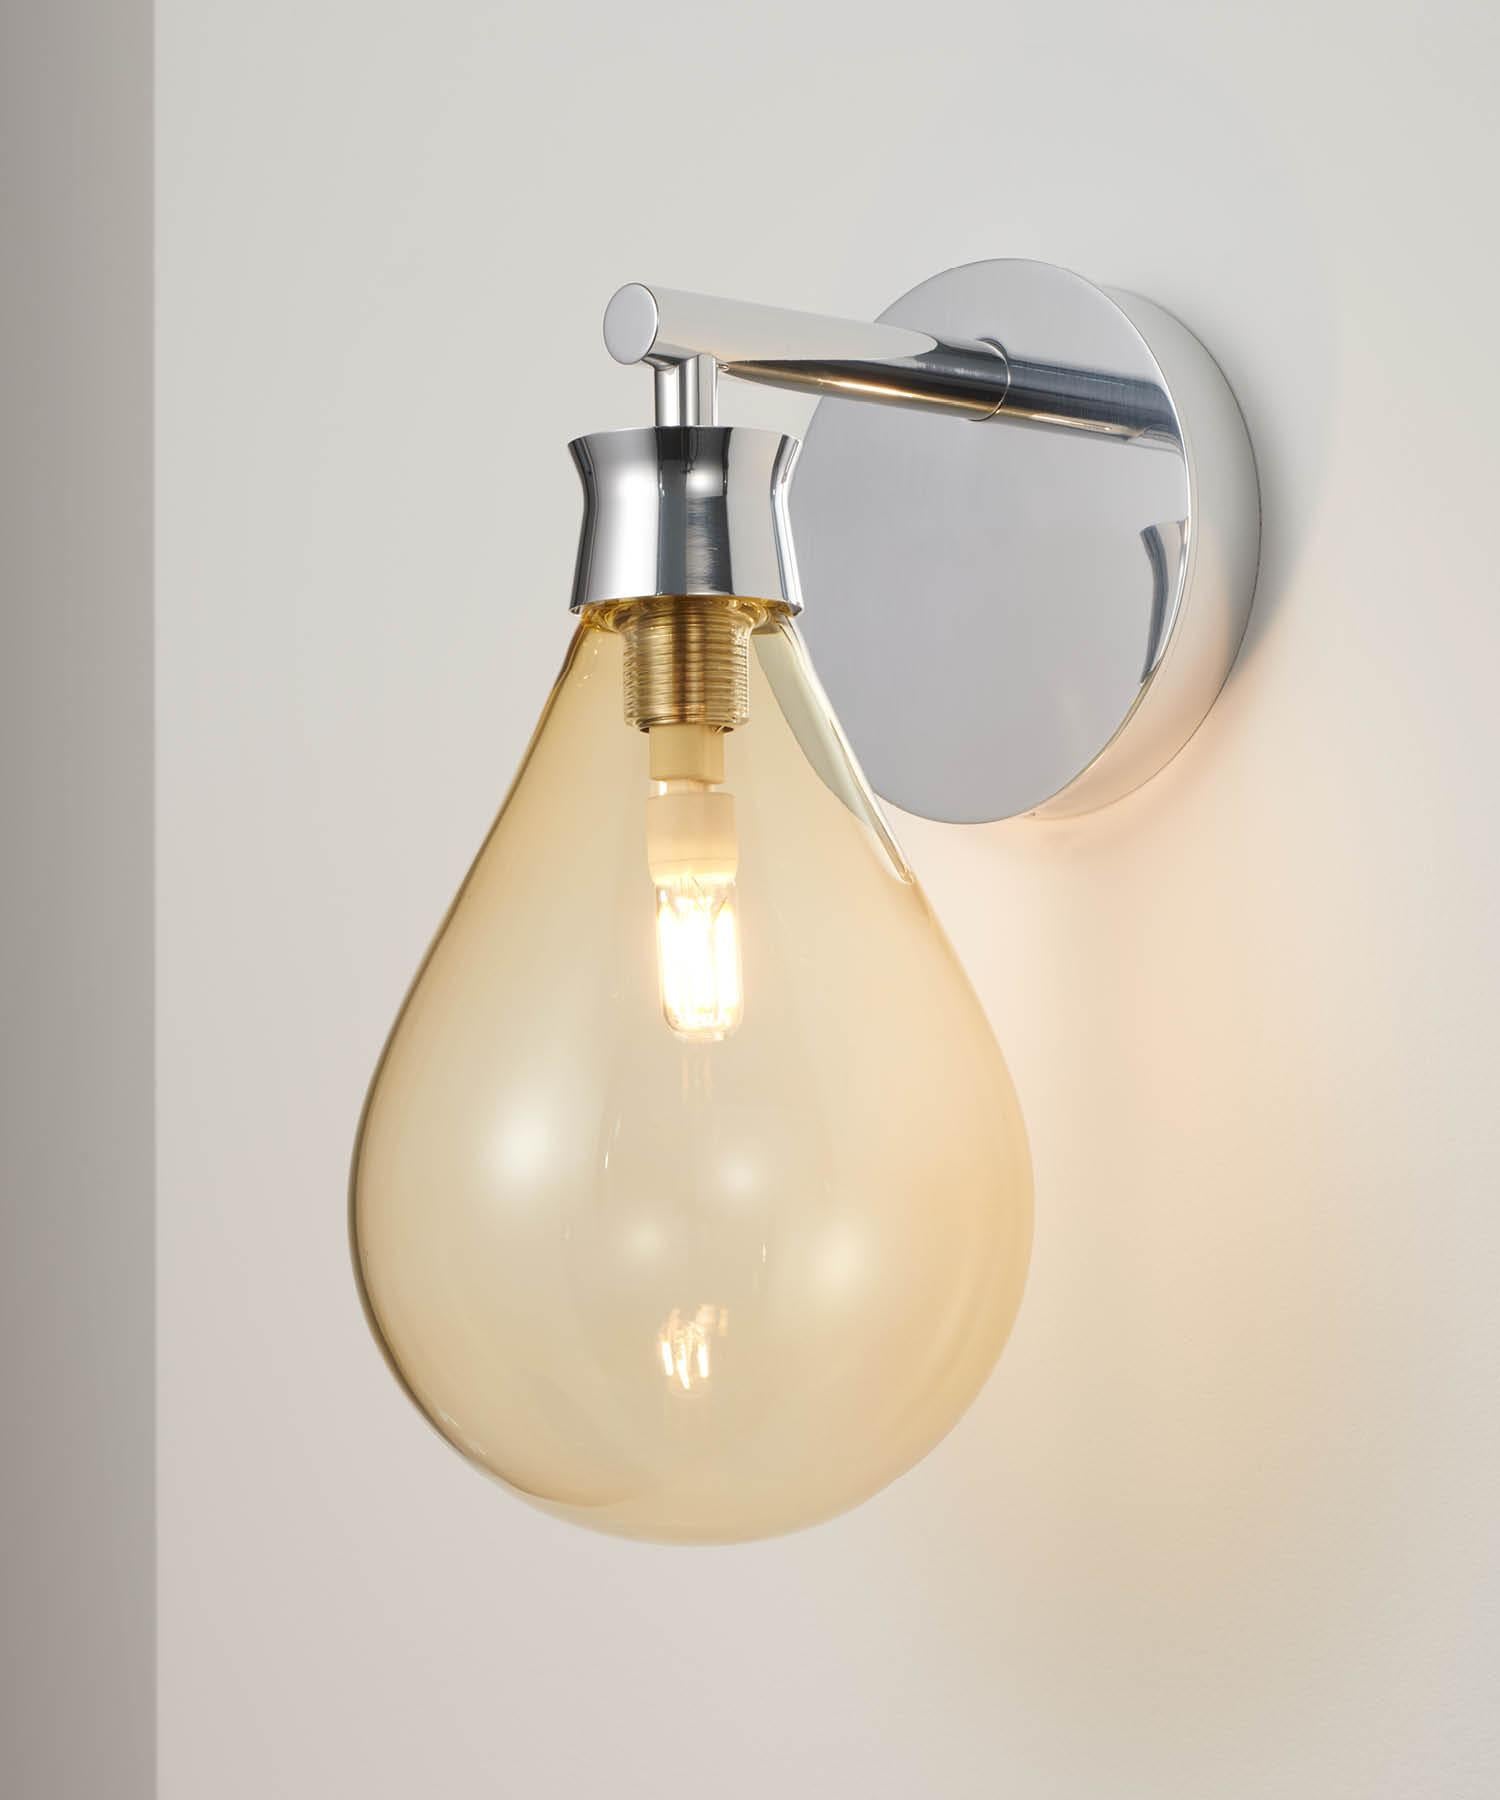 Contemporary and refined, the Cintola wall light combines hand-blown glass with a precision-machined aluminium body.
Available in a range of seven glass colours and three metal finishes, the wall light can also be mounted in two different